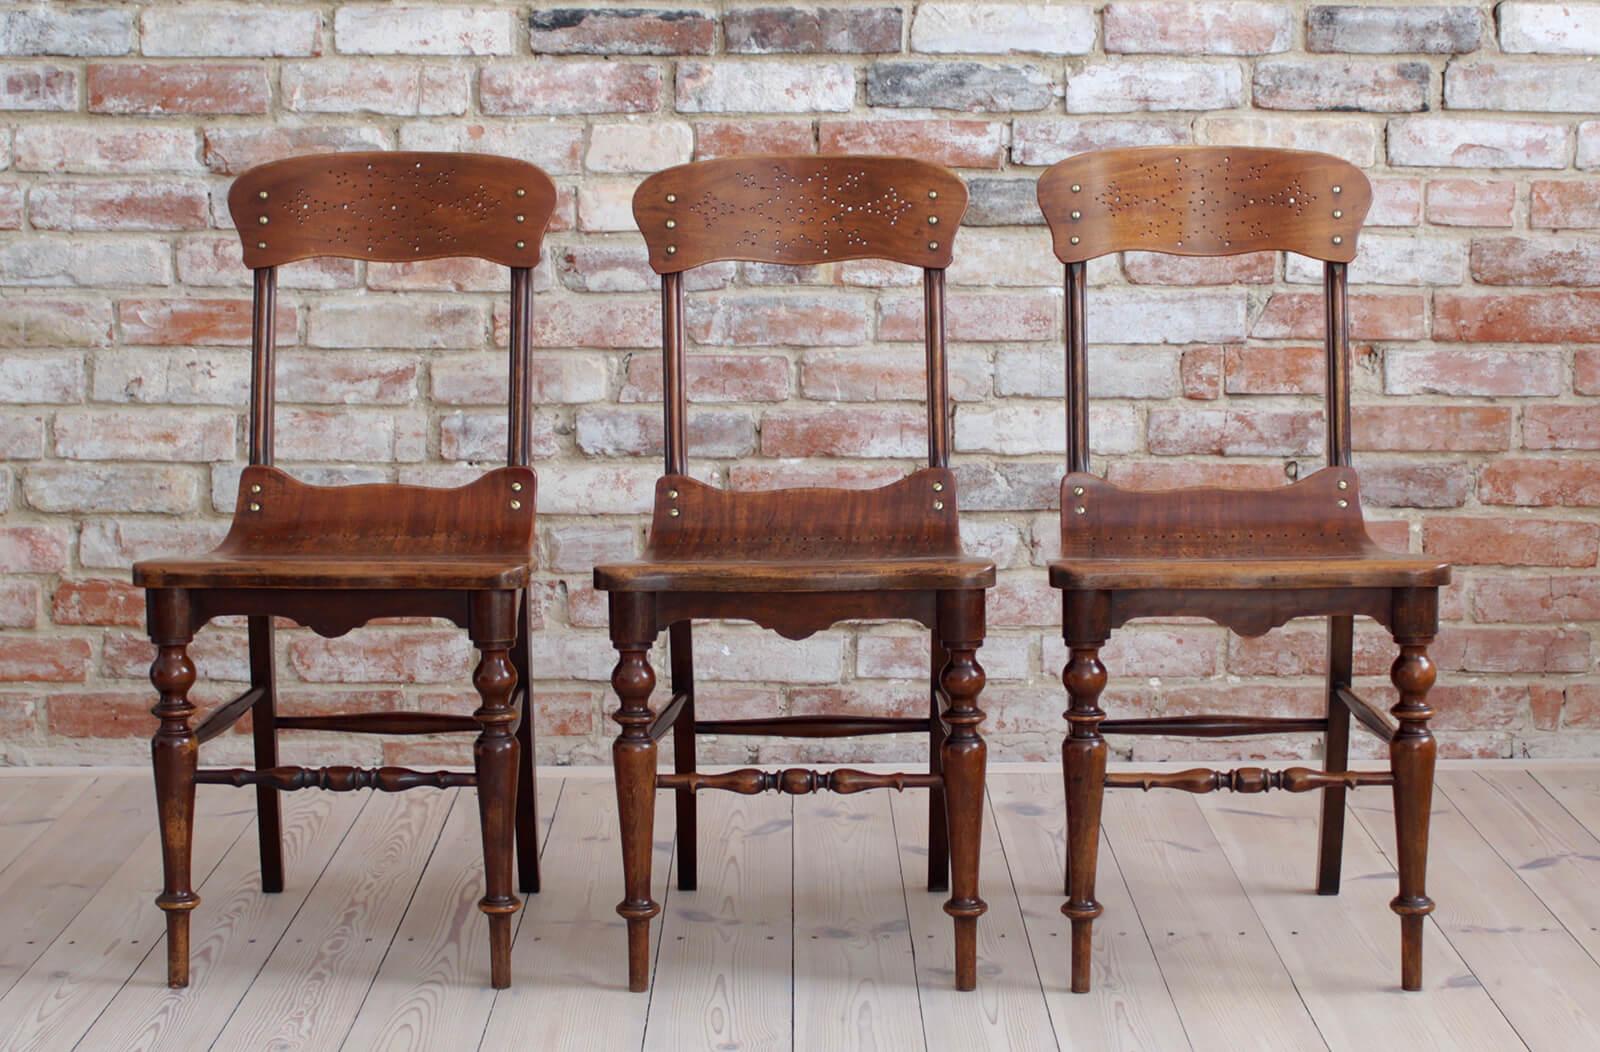 Set of 3 plywood chairs from early 20th century. The chair is set on wooden frame and has a profiled one-piece seat-back element made of plywood with incredibly detailed and beautiful patterns. It is a very unique object, most likely it served at a